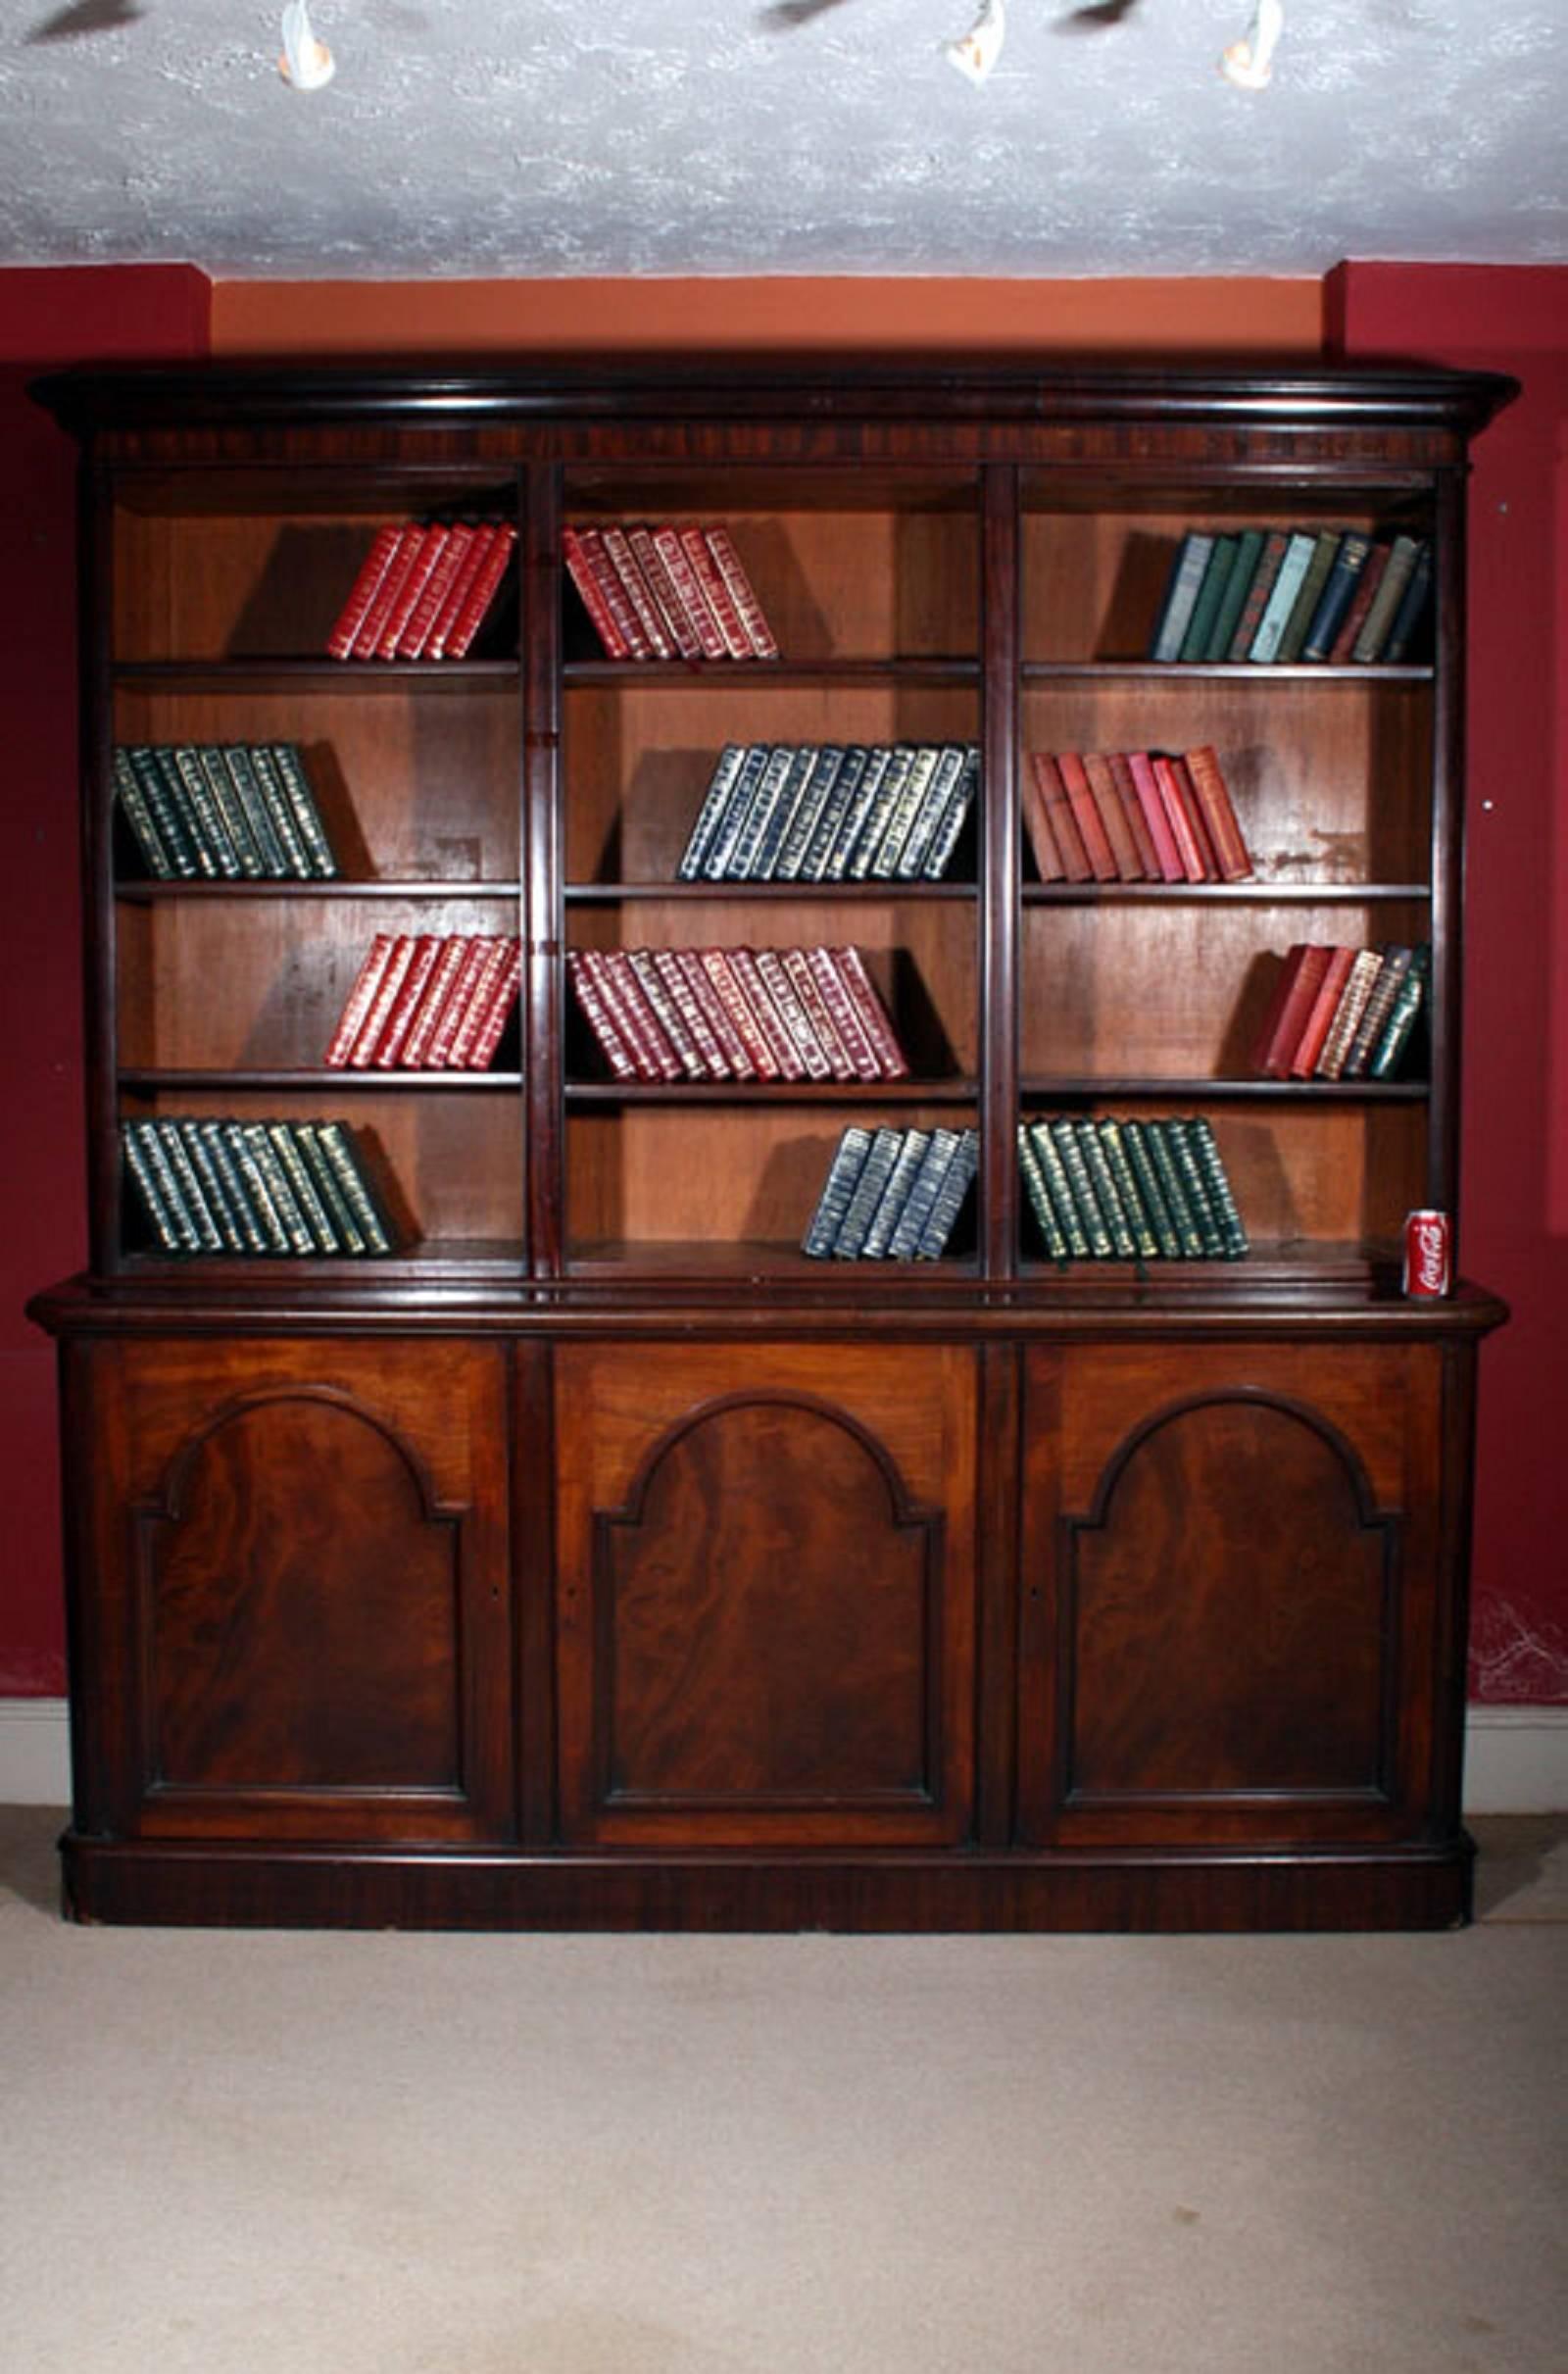 This is an antique Victorian mahogany open bookcase, circa 1850.

It has been masterfully crafted in a rich mahogany with adjustable shelves.

This upper section of this grand bookcase features three open sections with three sets of shelves each